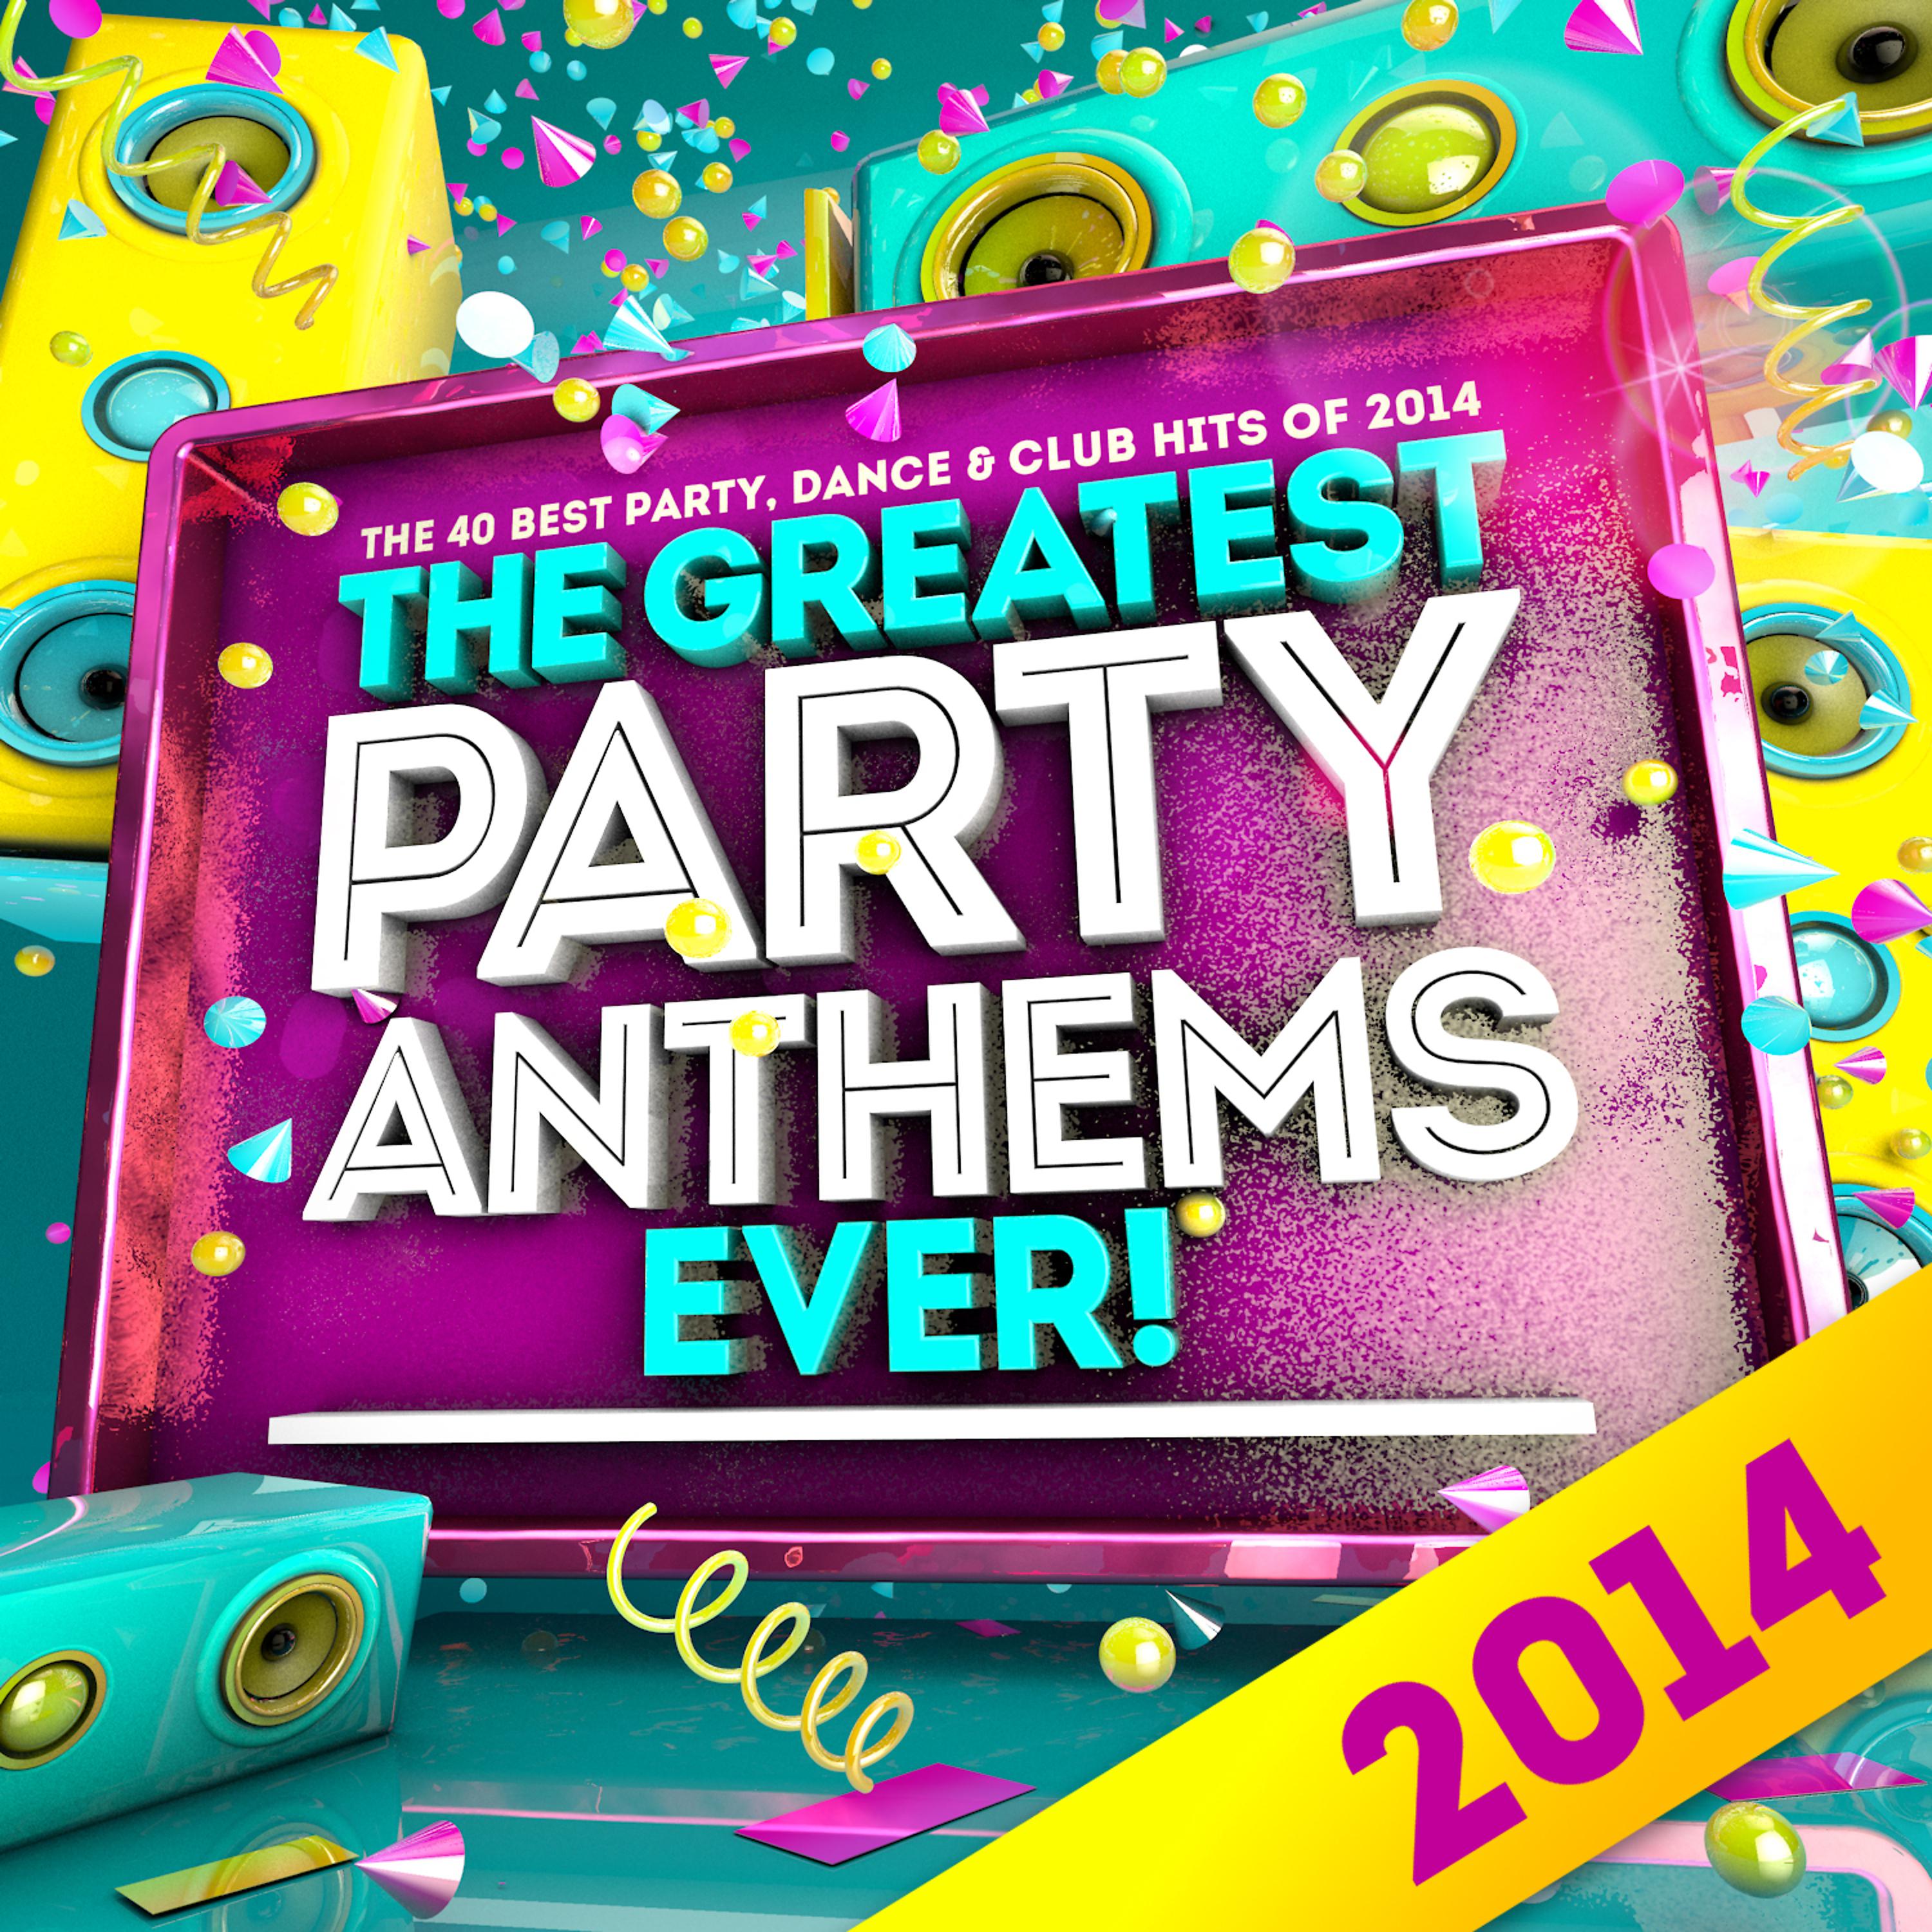 Постер альбома The Greatest 2014 Party Anthems Ever ! The 40 Best Party, Dance & Club Hits of 2014